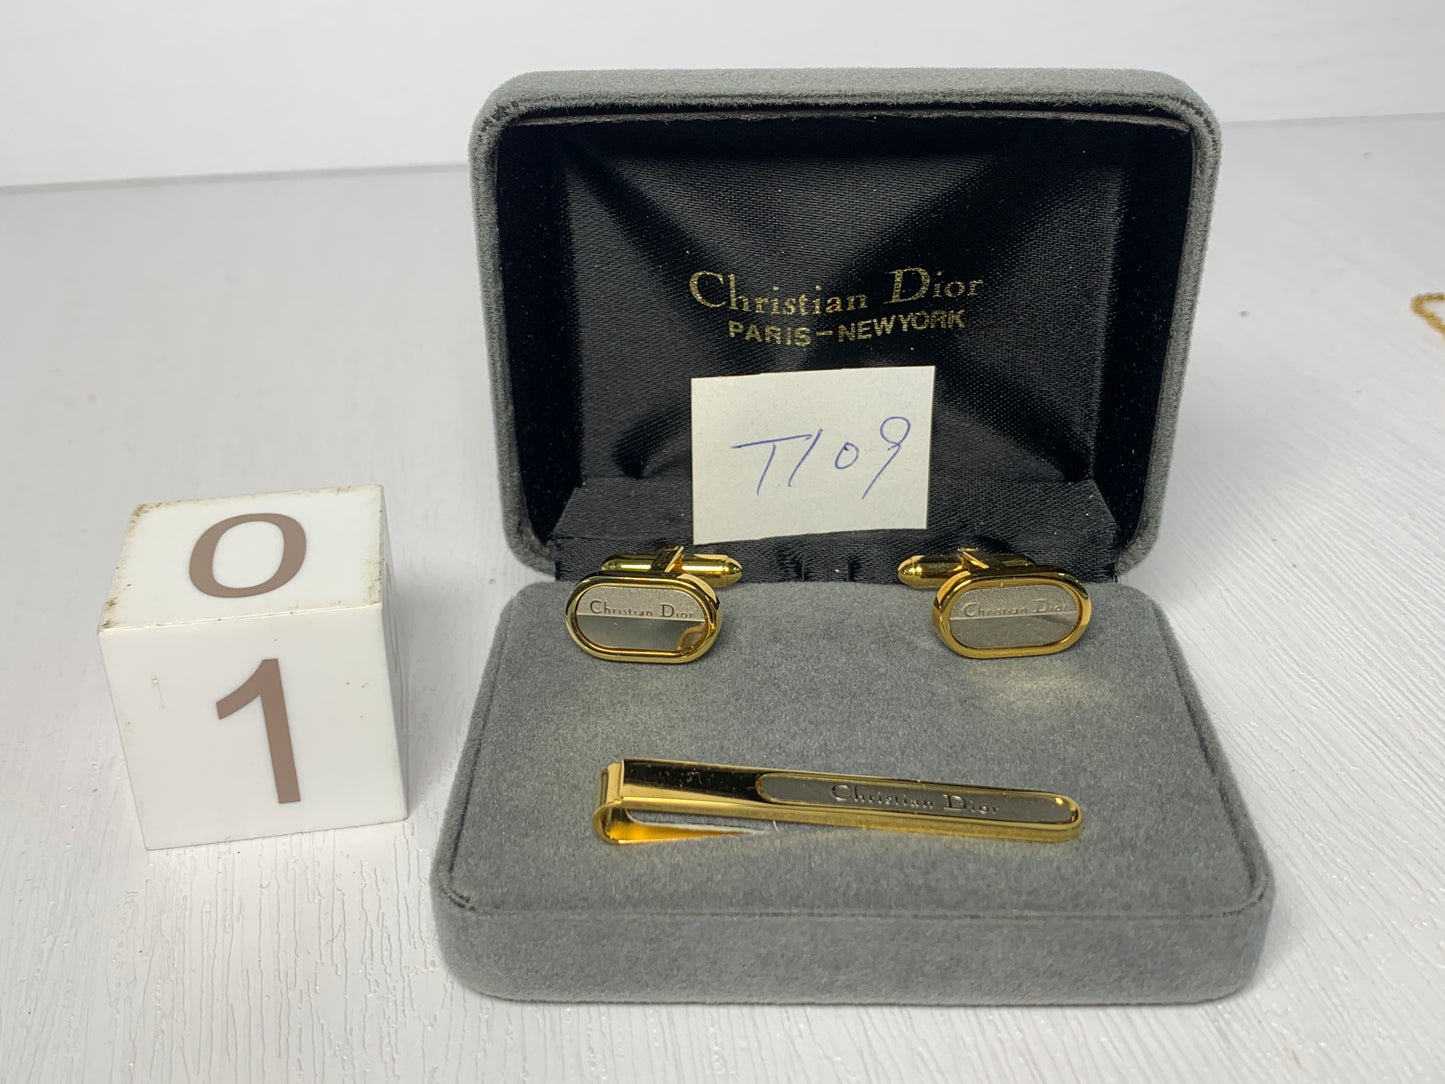 Vintage Gold tone Tie clip dunhill  christian Dior cufflinks with box  - 3MAR